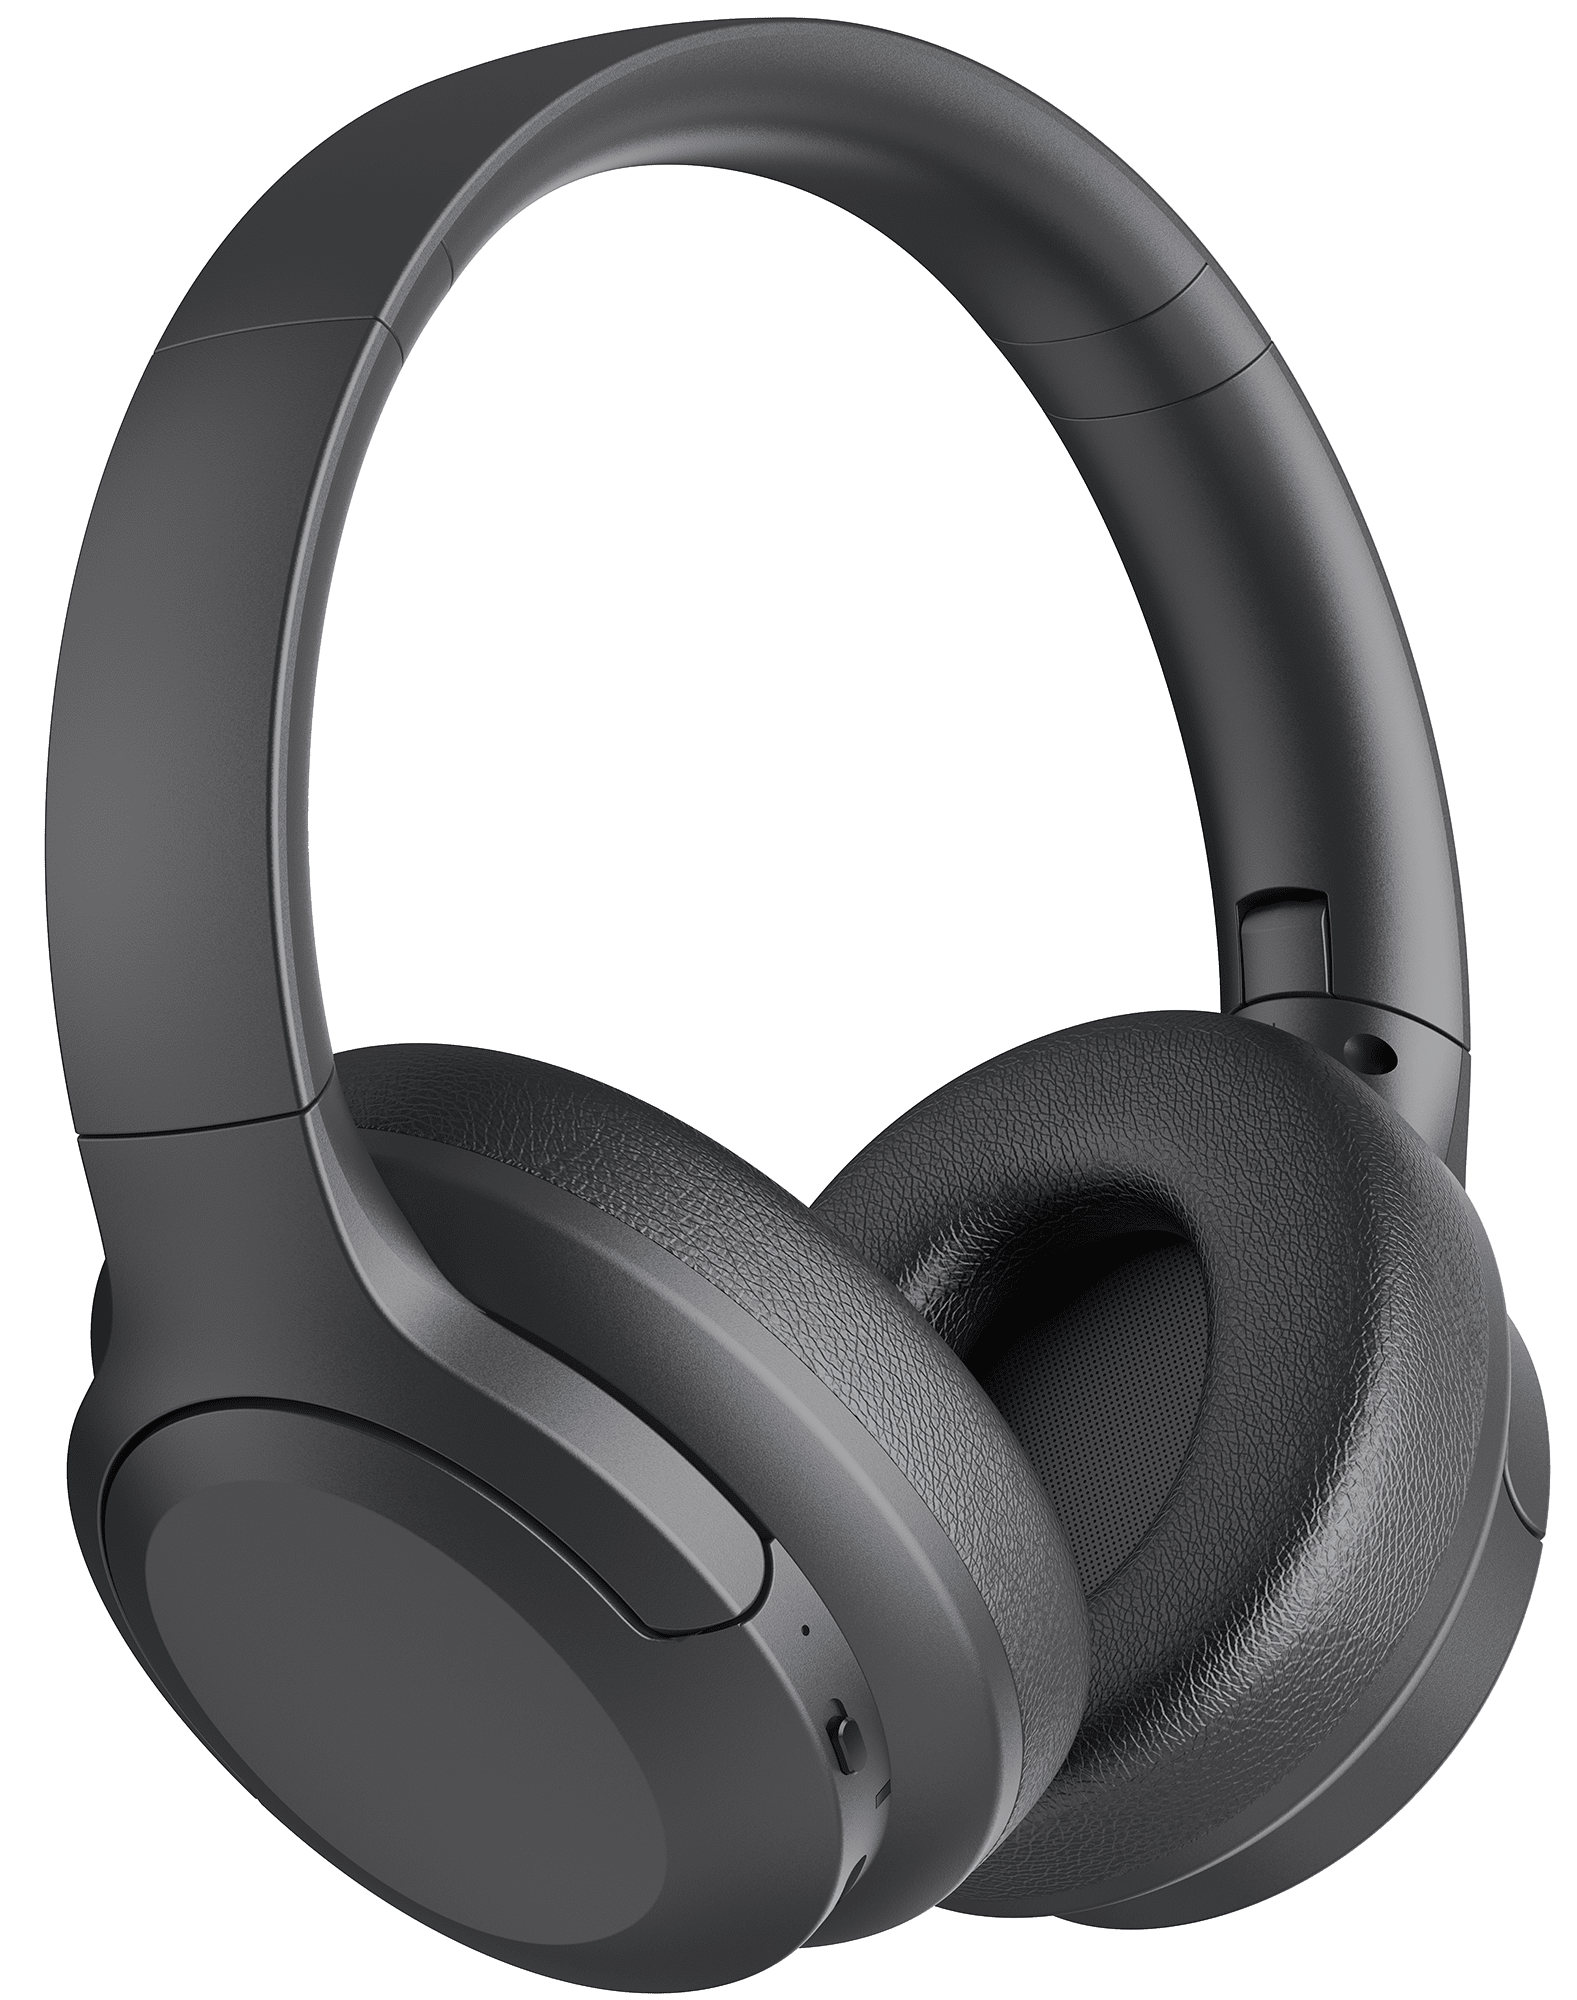 INFURTURE H1 Active Noise Cancelling Headphones with Microphone, Wireless  Over Ear Bluetooth Headphones, 3D Deep Bass, Memory Foam Ear Cups,40H